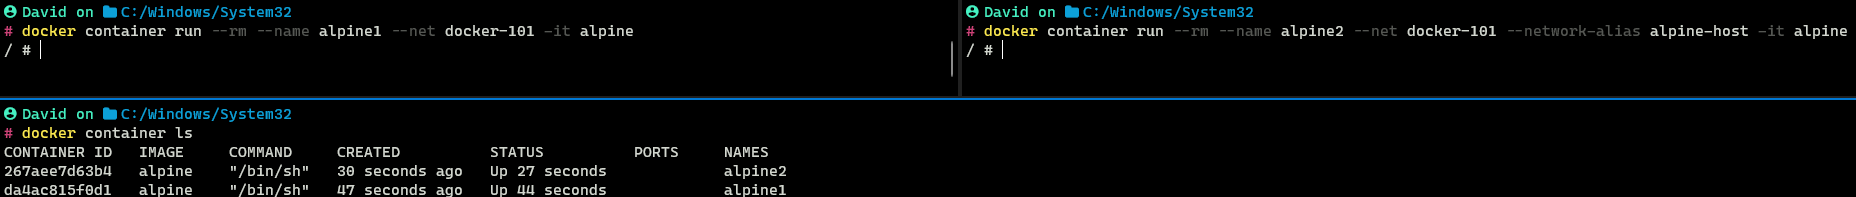 Running two Docker Containers